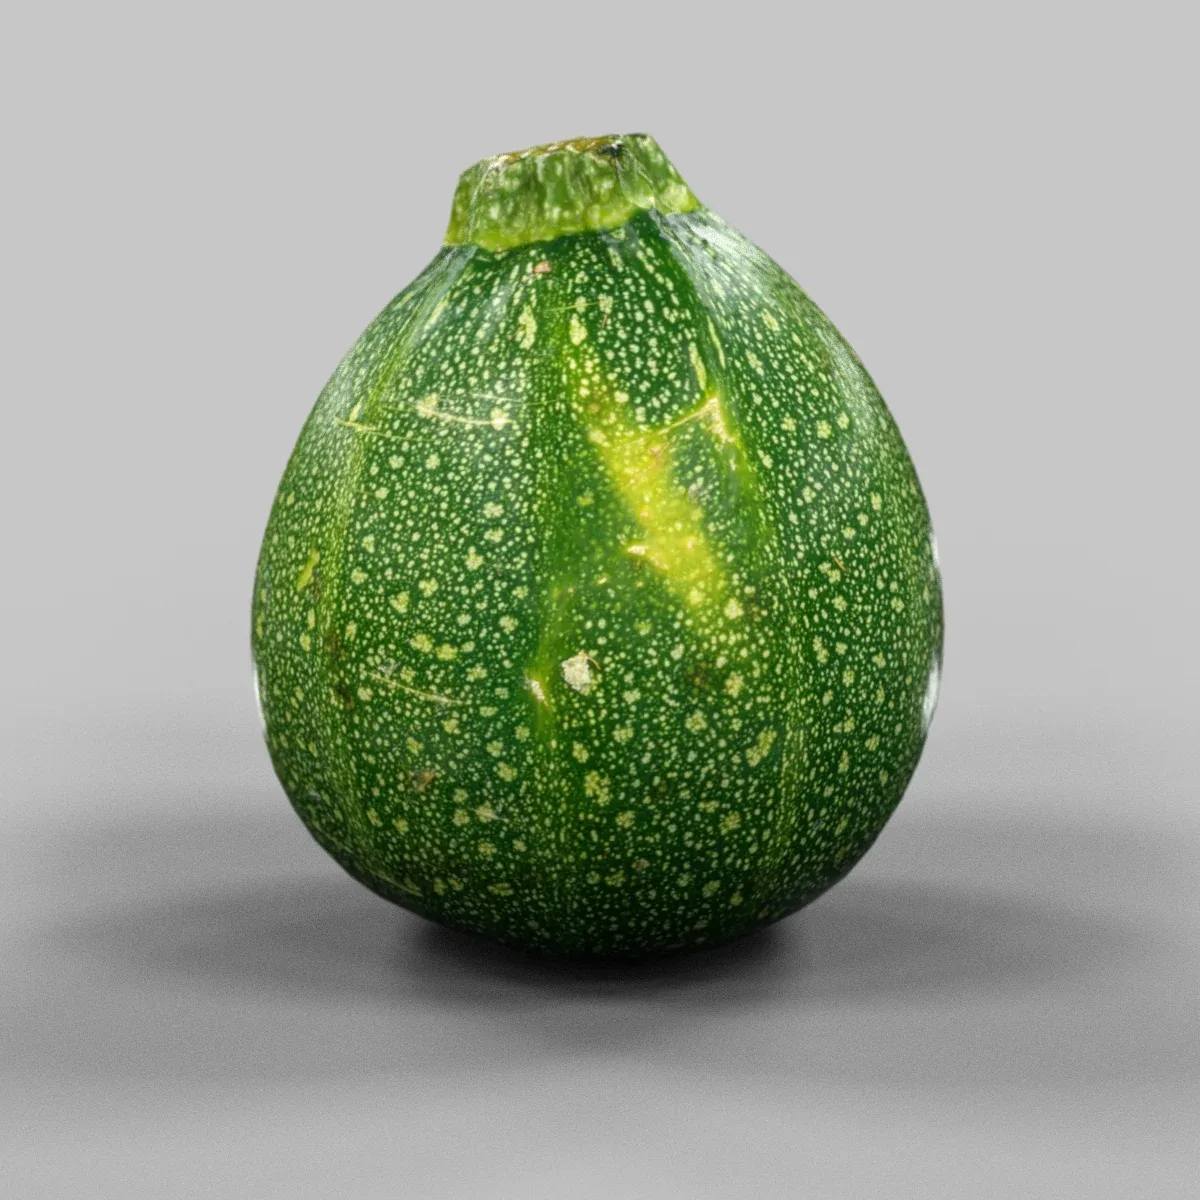 Realistic 3D Scanned Model Collection of 25 Fruits and Vegetables with OBJ Format and 2k JPG Textures